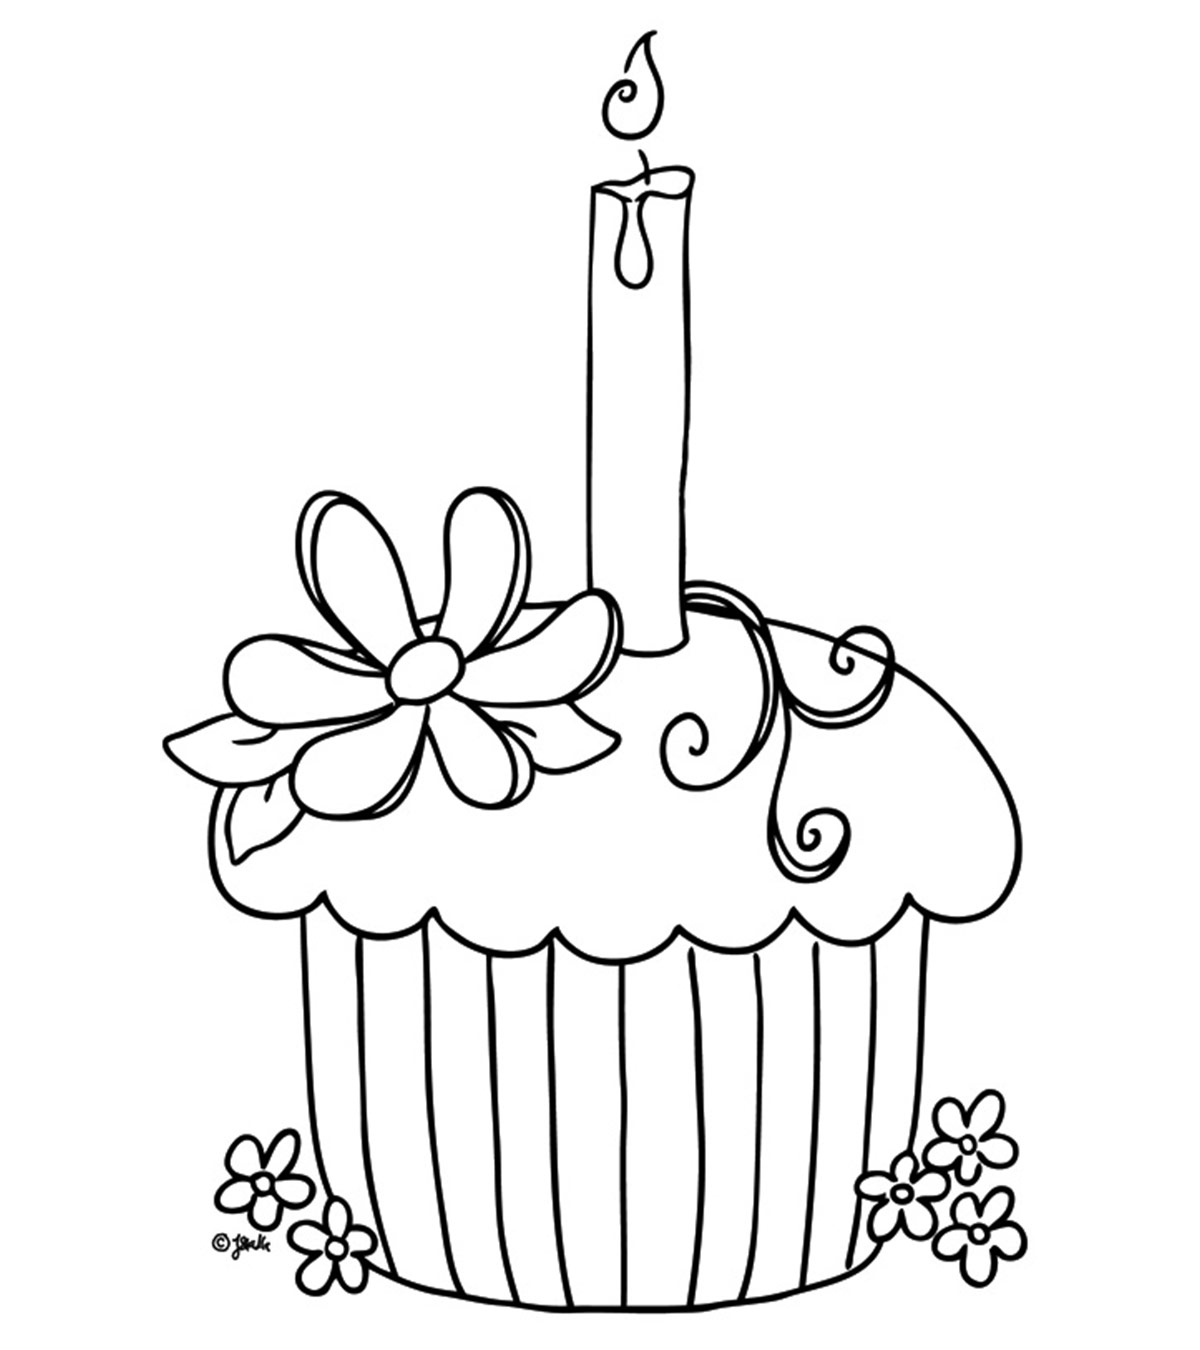 25 Lovely Cupcake Coloring Pages Your Toddler Will Love_image